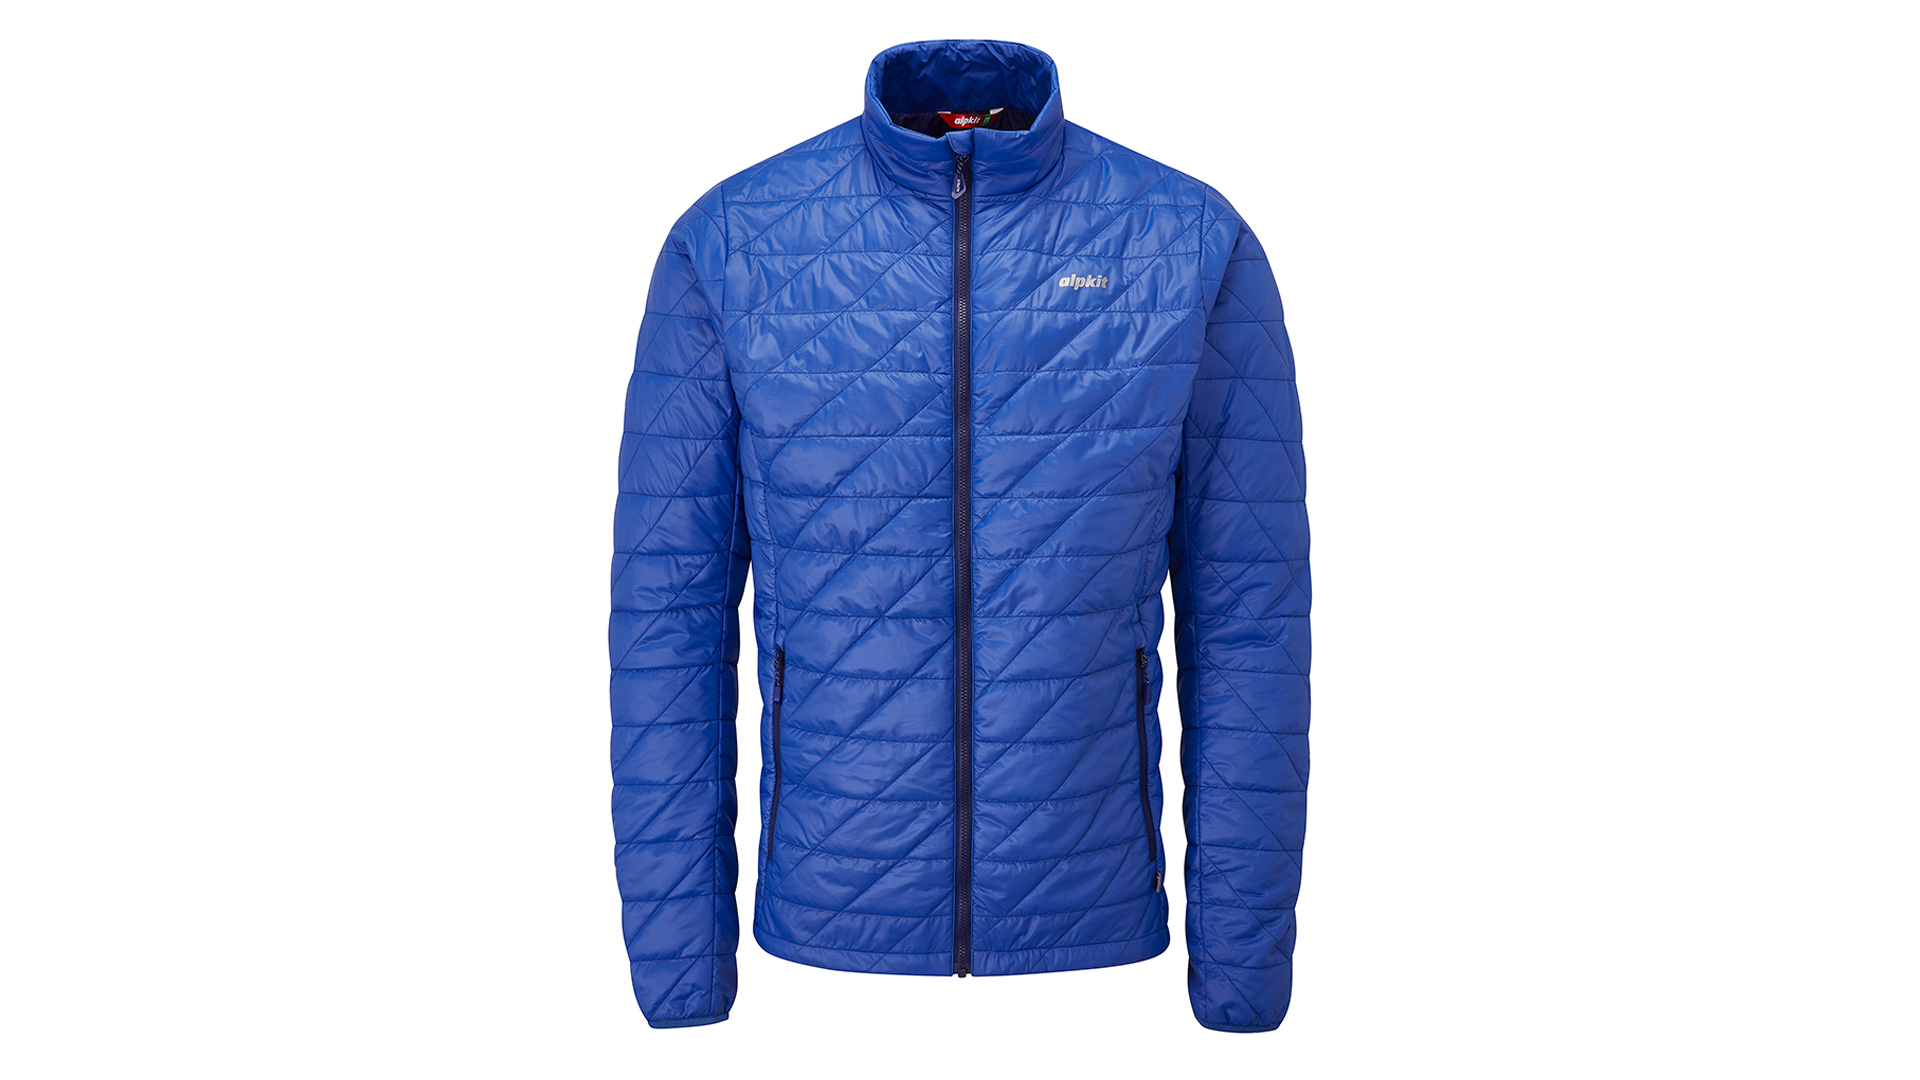 Alpkit Kanyo puffer jacket review: a great midlayer or outer | Advnture